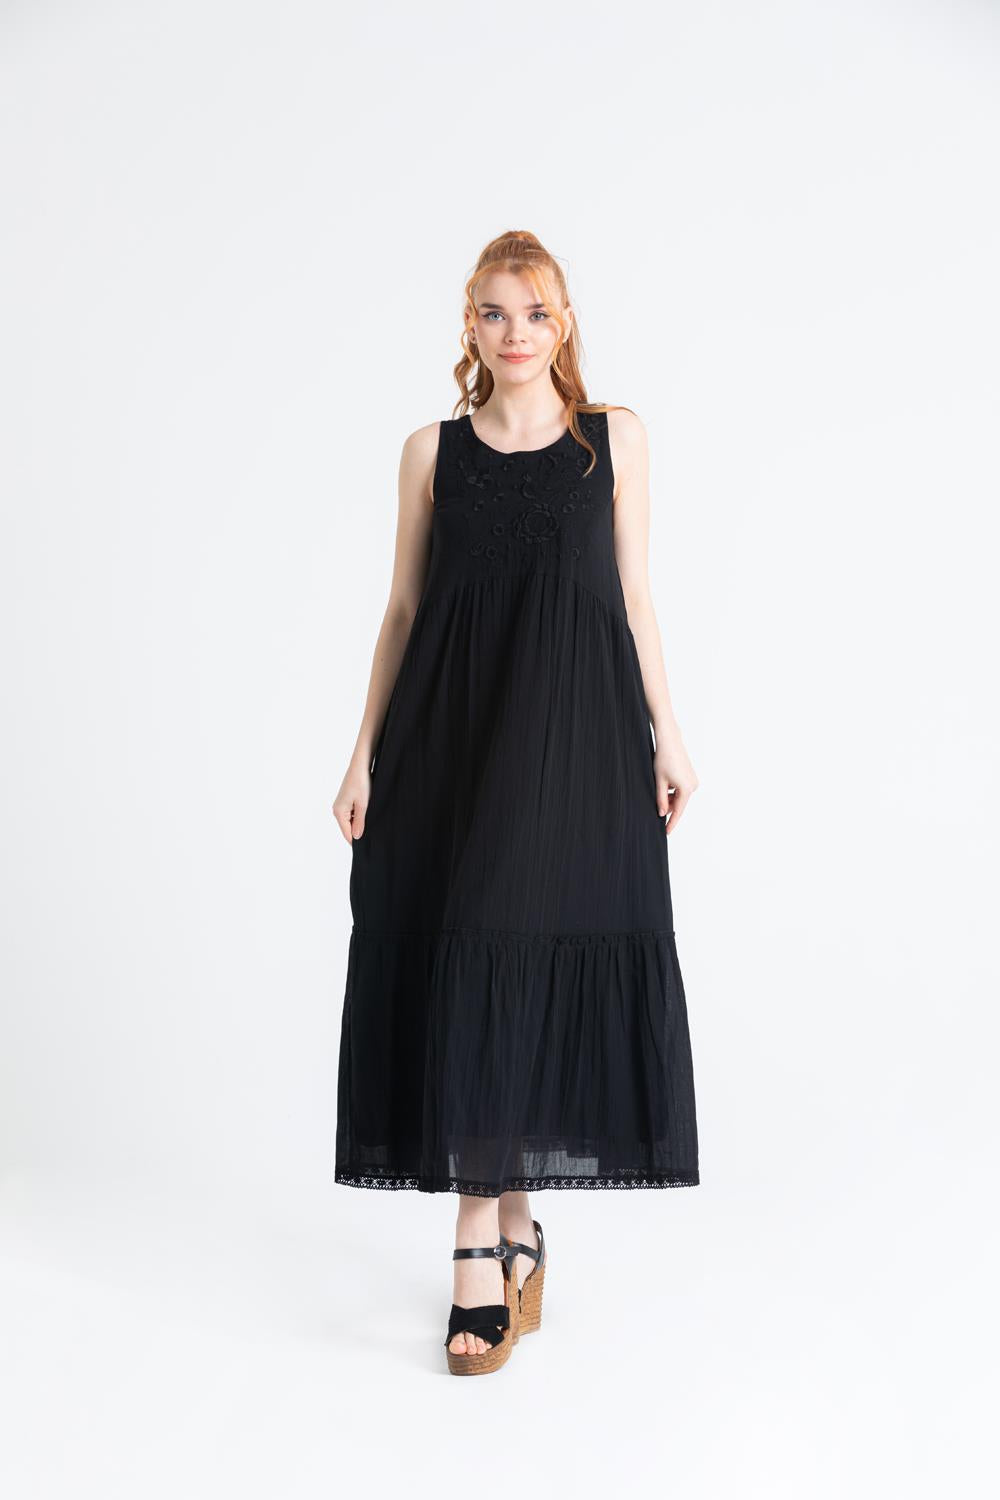 Sleeveless Sile Cloth Embroidered Maxi Dress with Tie-back Detail - trendynow